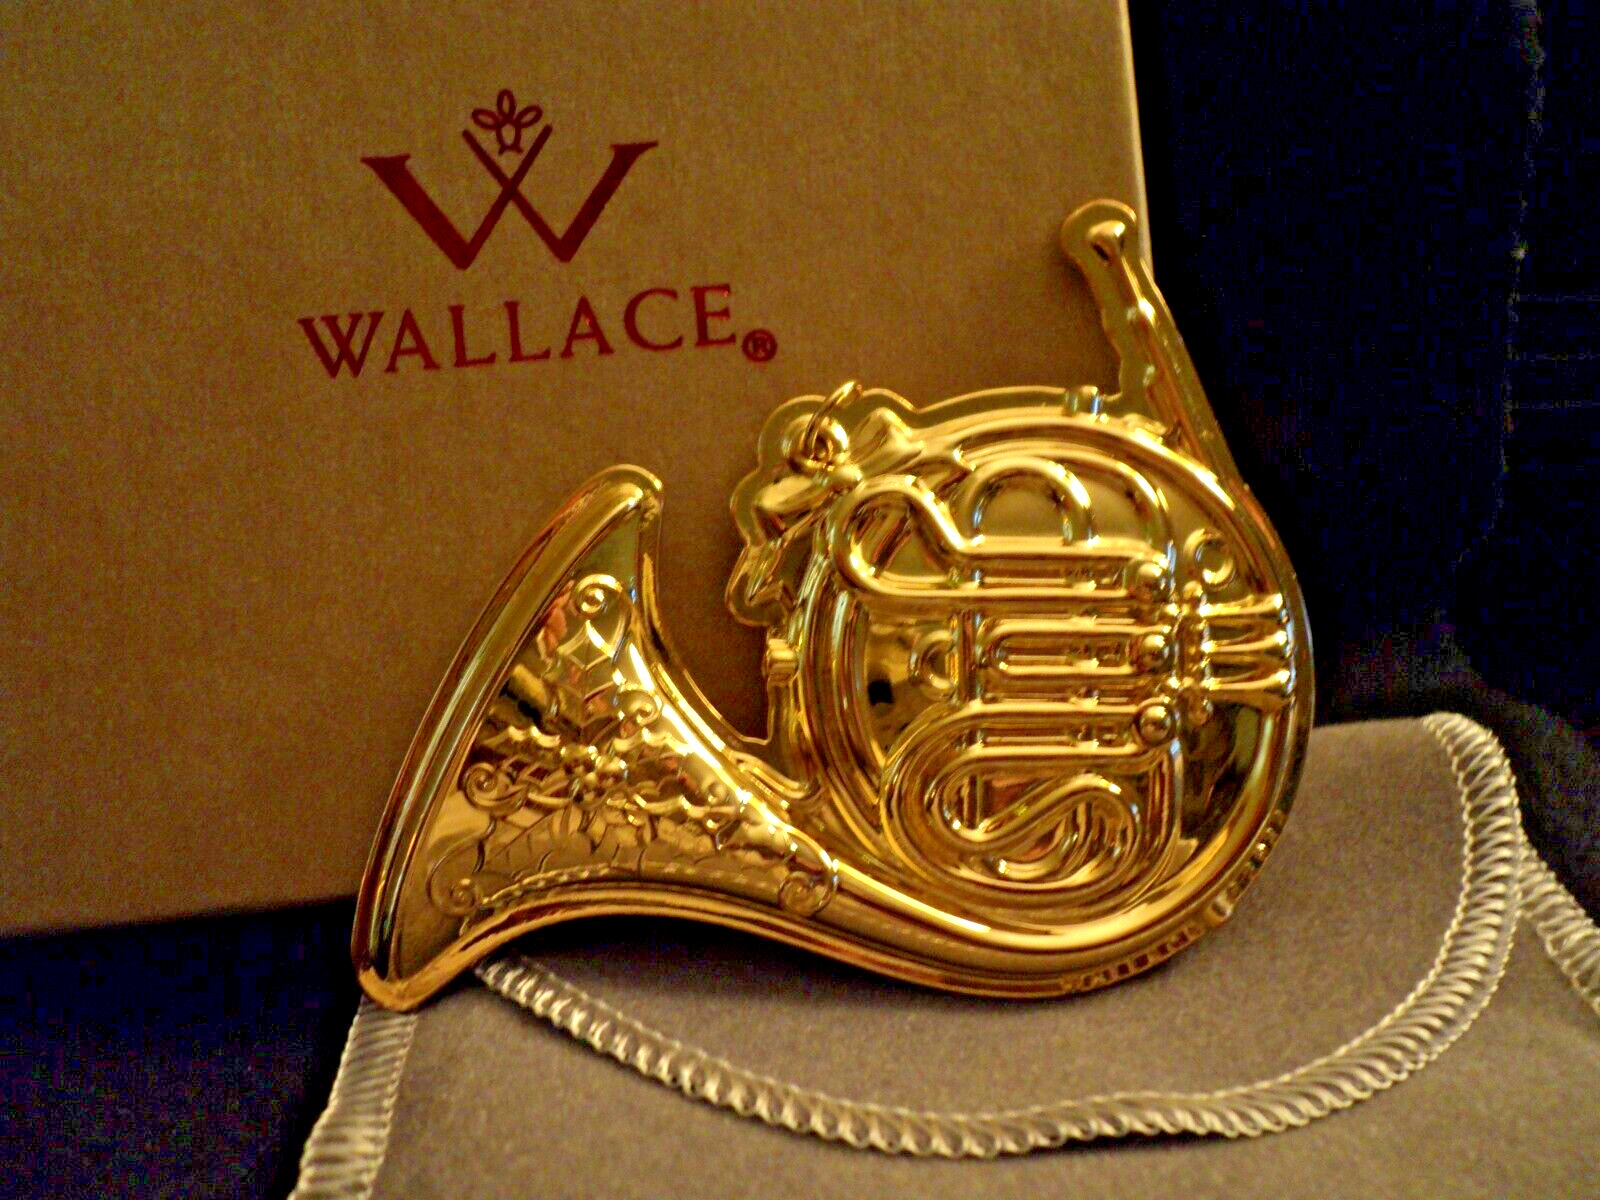 2022 WALLACE Gold Plated French Horn-1st Edition-Musical Instrument Ornament